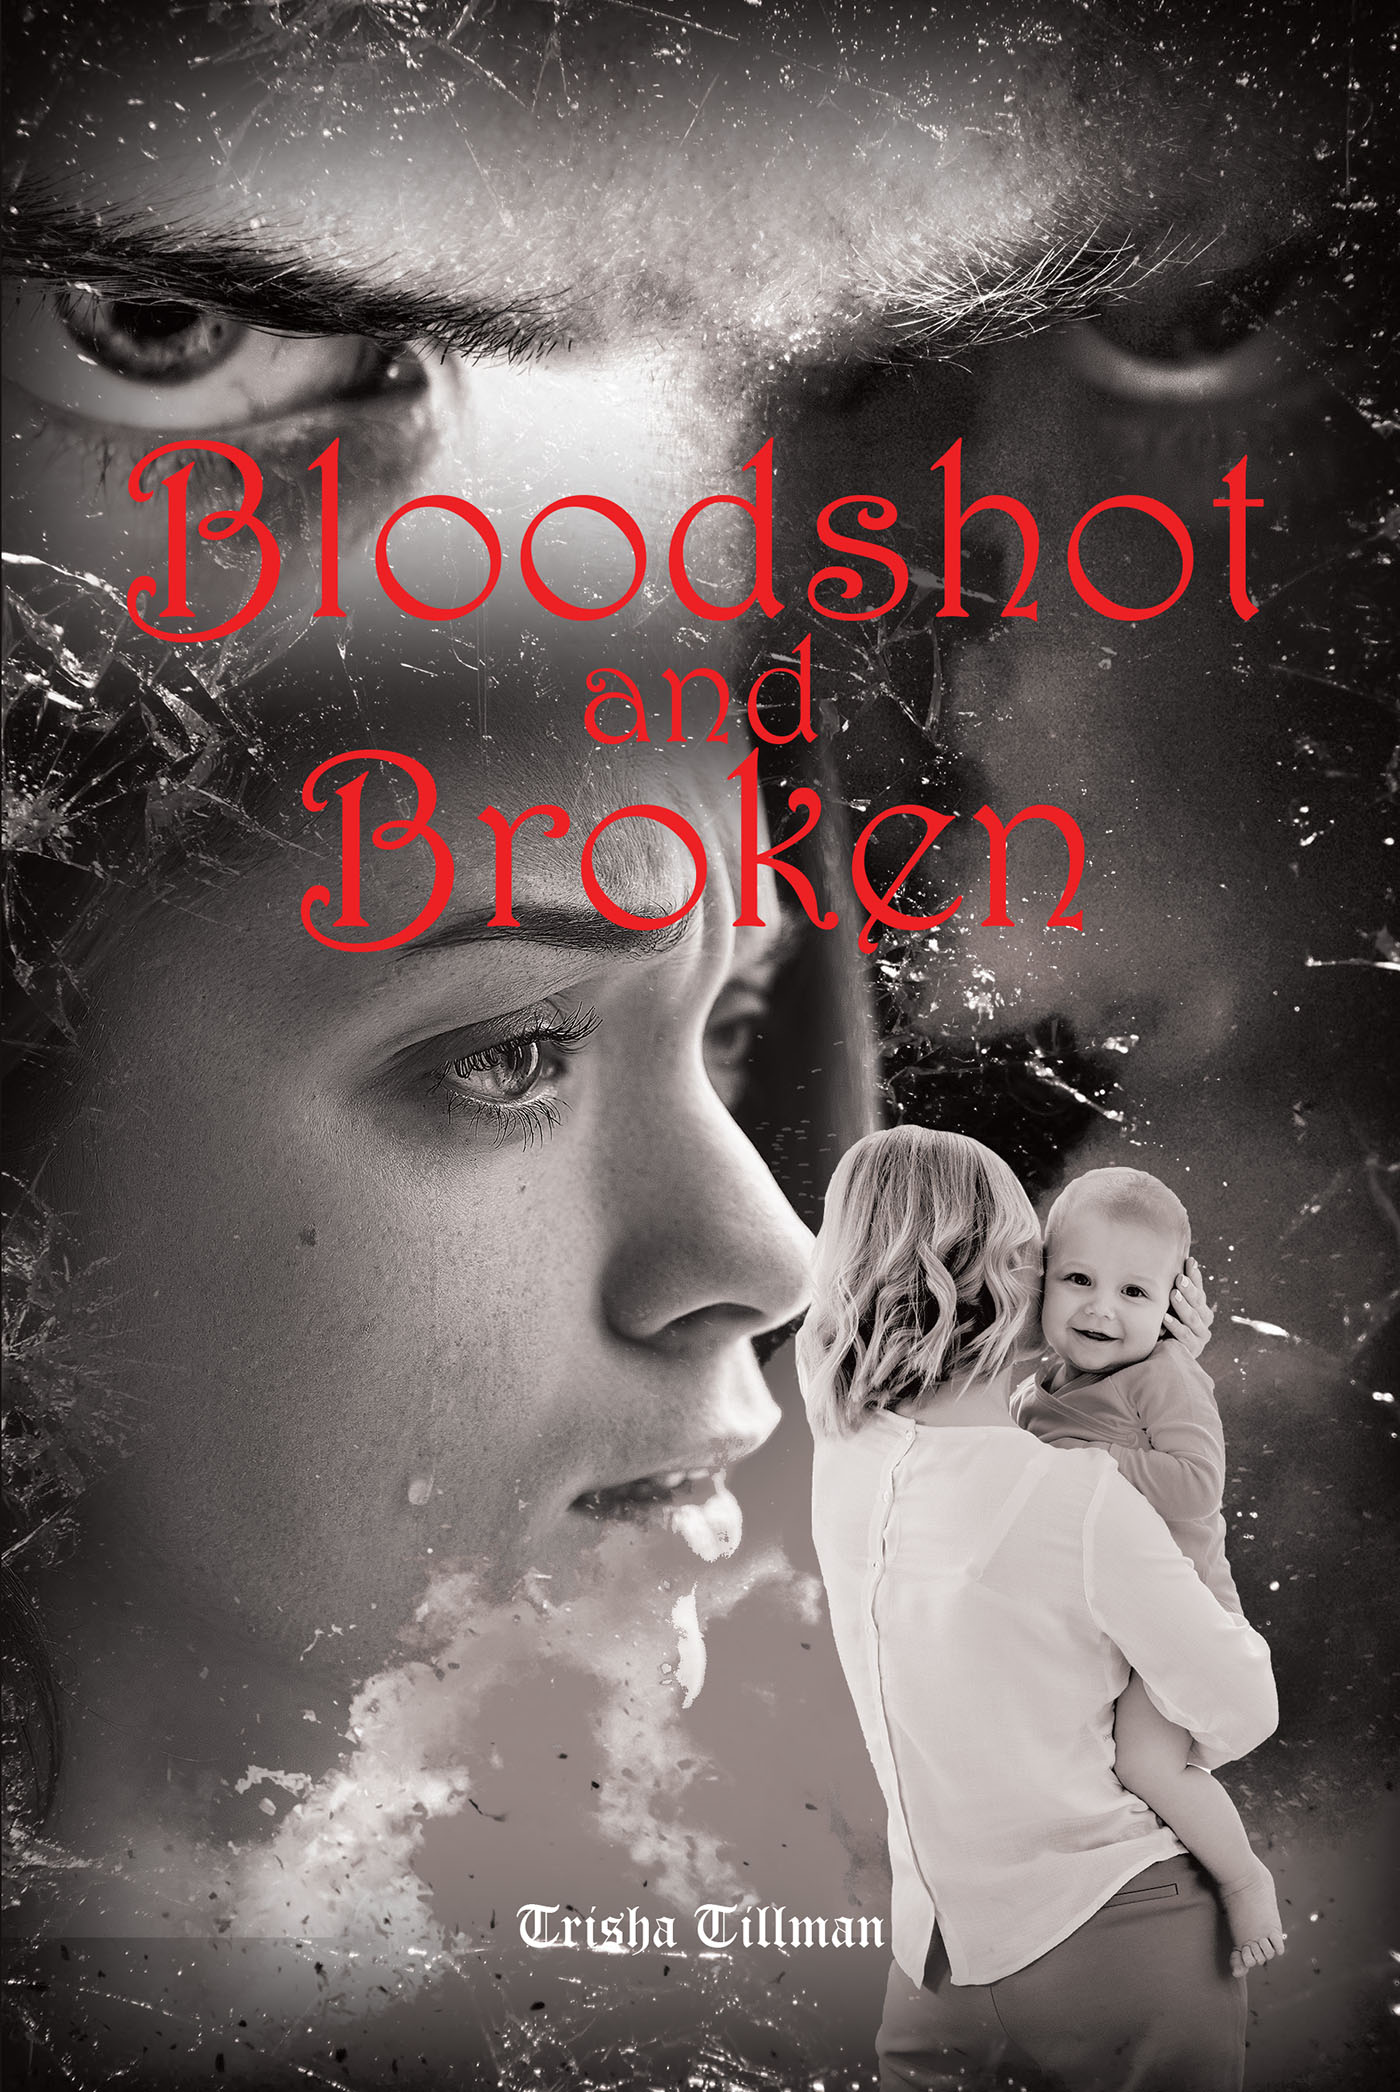 Trisha Tillman’s New Book, "Bloodshot and Broken," is a Gripping Story That Centers Around a Young Woman That Must Discover Who She Was After Forgetting Her Entire Past